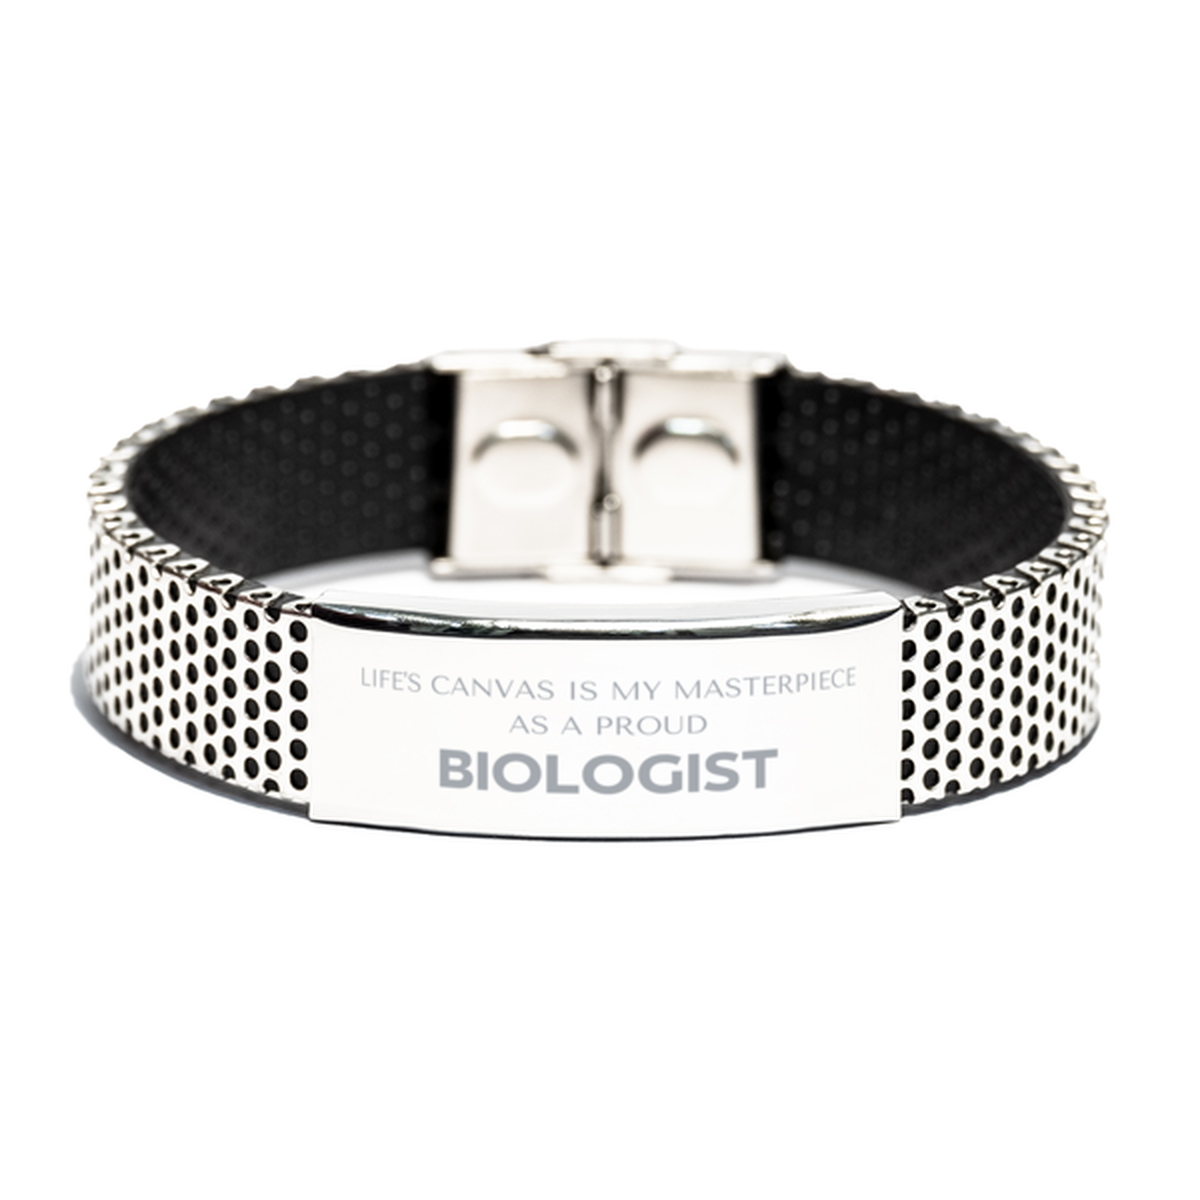 Proud Biologist Gifts, Life's canvas is my masterpiece, Epic Birthday Christmas Unique Stainless Steel Bracelet For Biologist, Coworkers, Men, Women, Friends